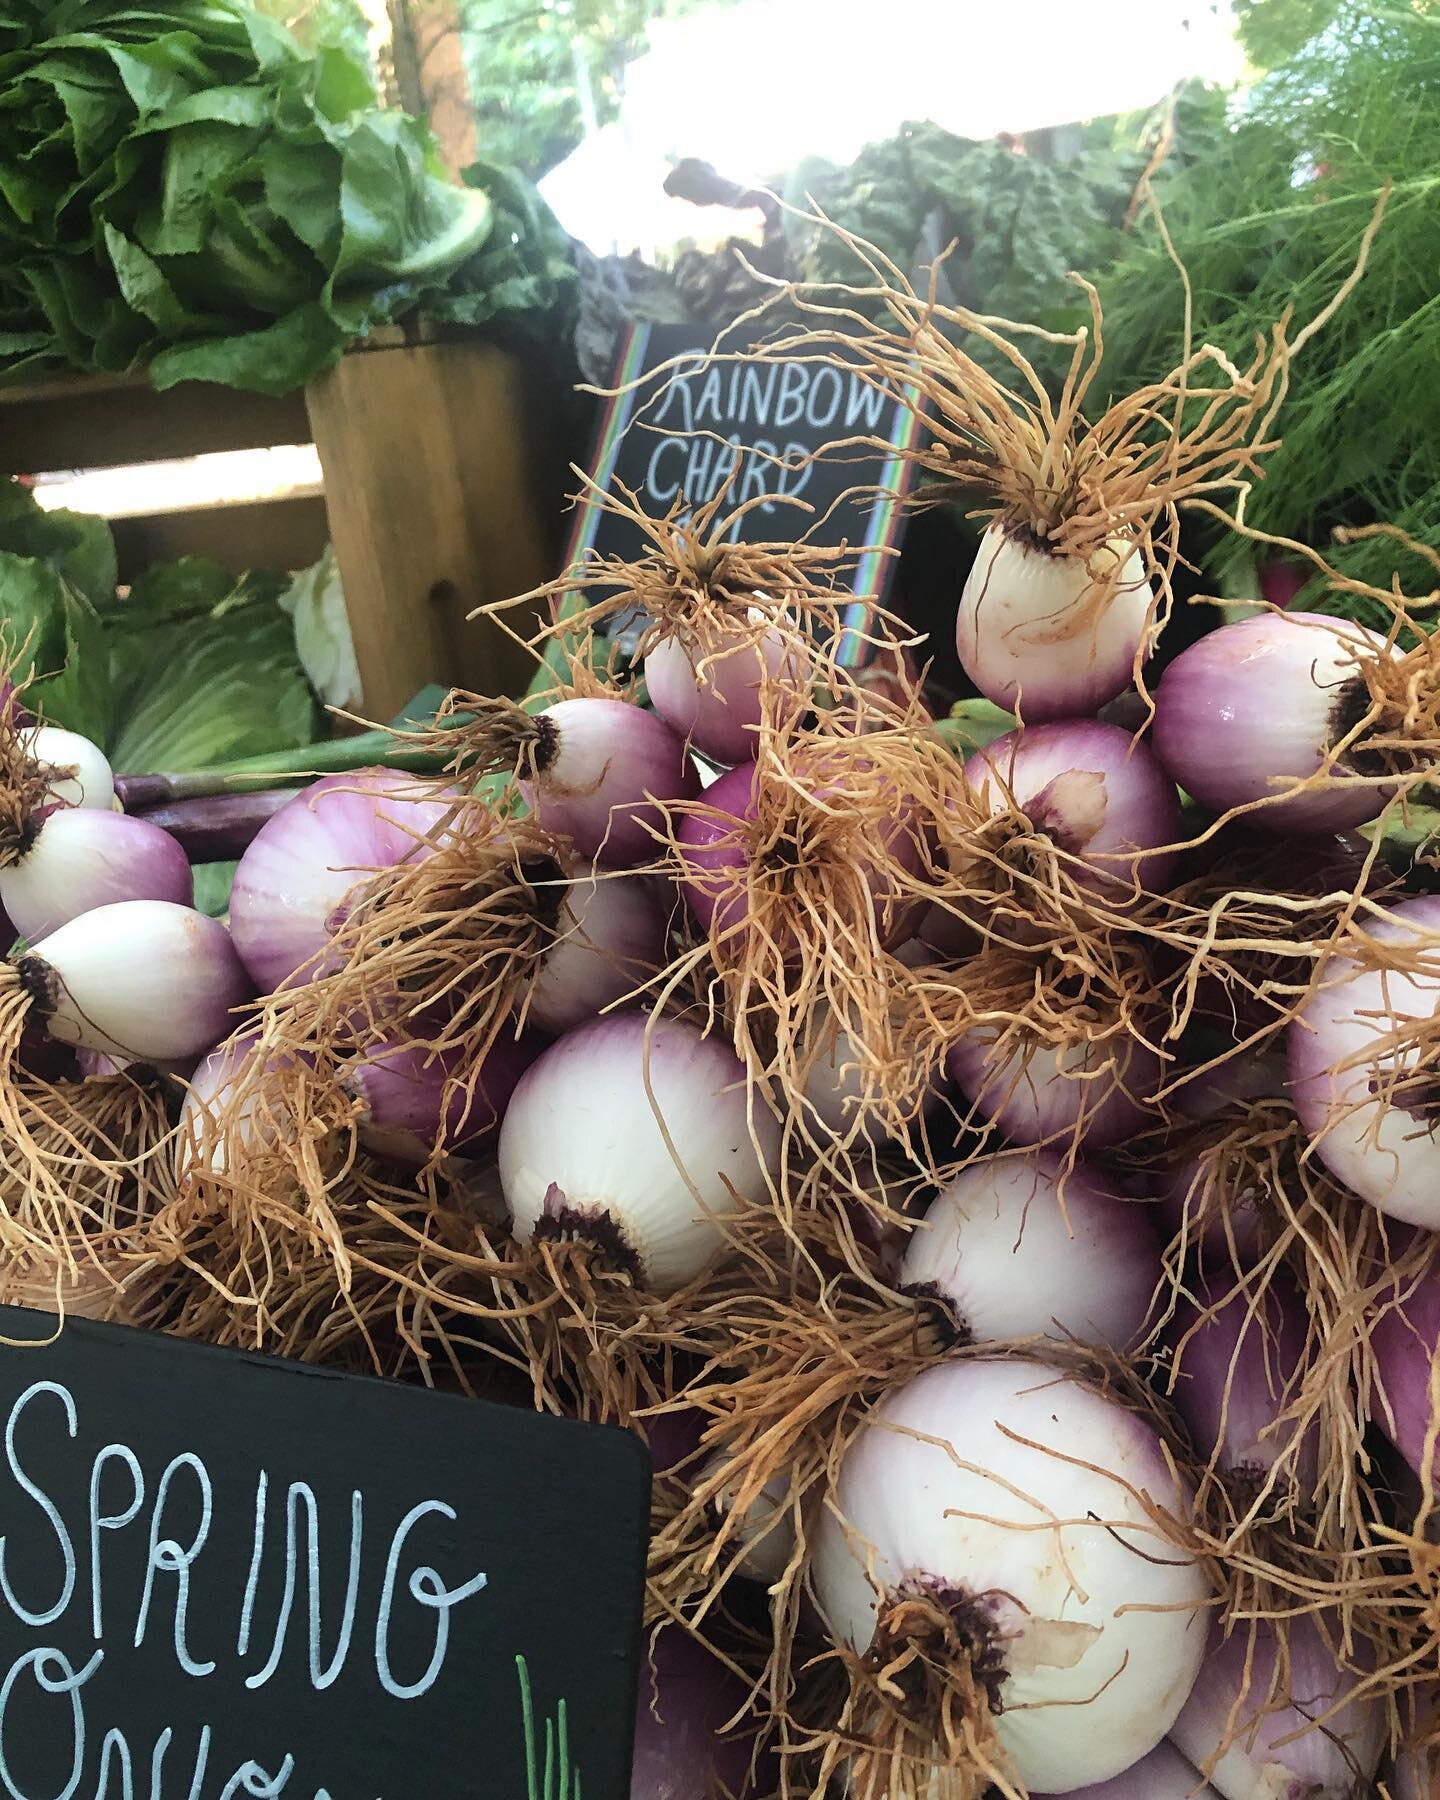 Farmers Market Season is Fantastic&hellip; Let&rsquo;s Eat LOCAL! 
Shop Freedom Farmers Market Every Saturday 8:30am-Noon
May 20th is loaded with all your local food needs.
See who&rsquo;s at market this Saturday:
 
POP UP VENDOR:
Capt Don&rsquo;s Se